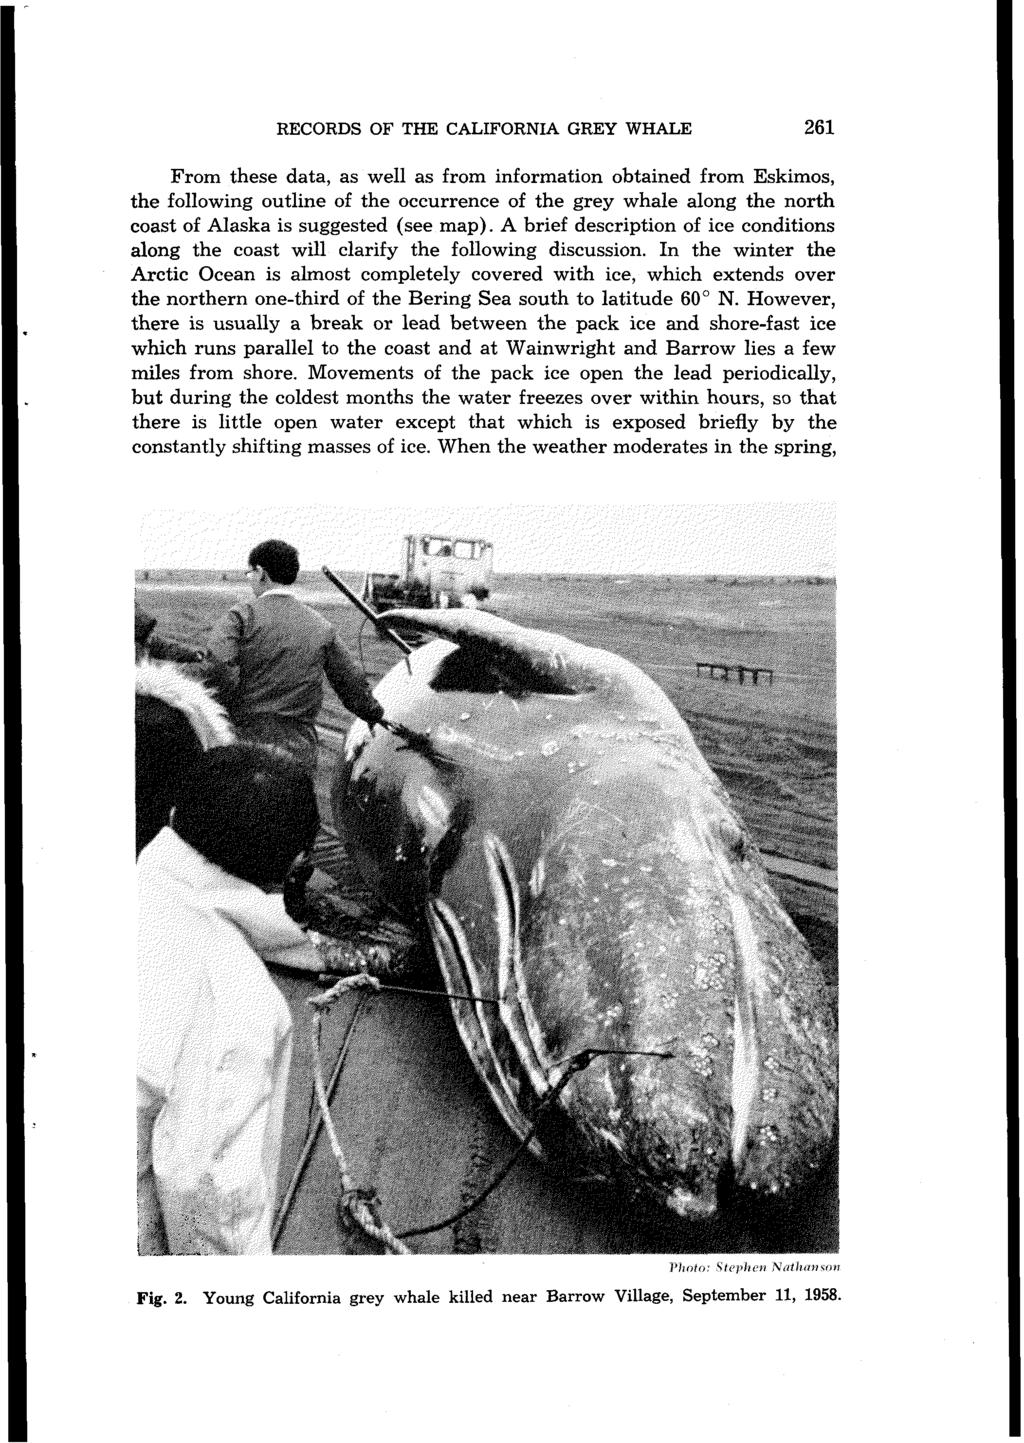 RECORDS THE CALIFORNIA OF GREY WHALE 261 From these data, as well as from information obtained from Eskimos, the following outline of the occurrence of the grey whale along the north coast of Alaska